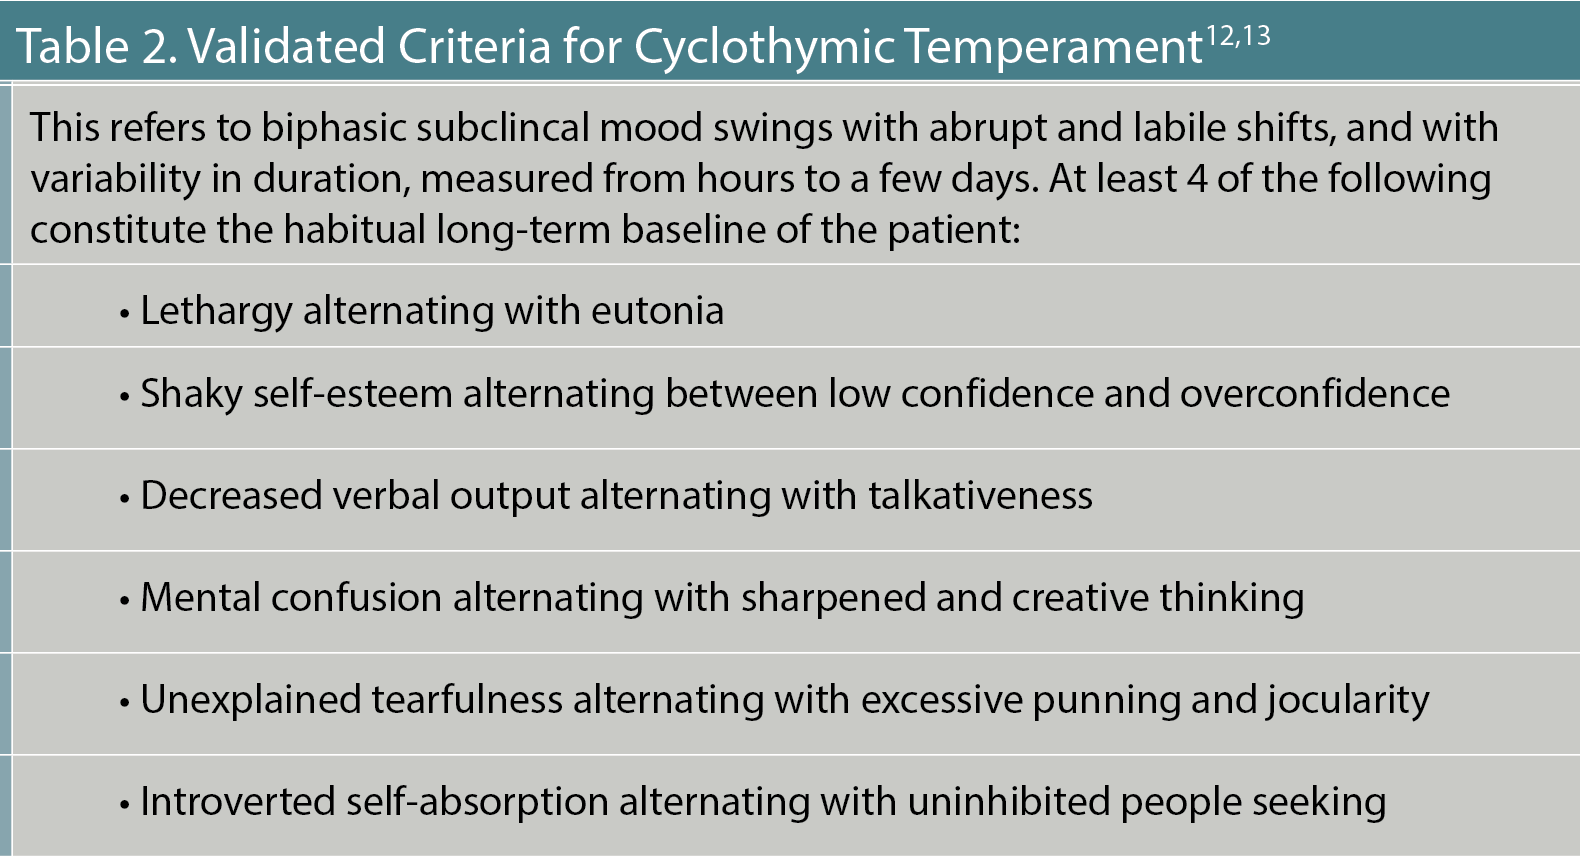 Table 2. Validated Criteria for Cyclothymic Temperament